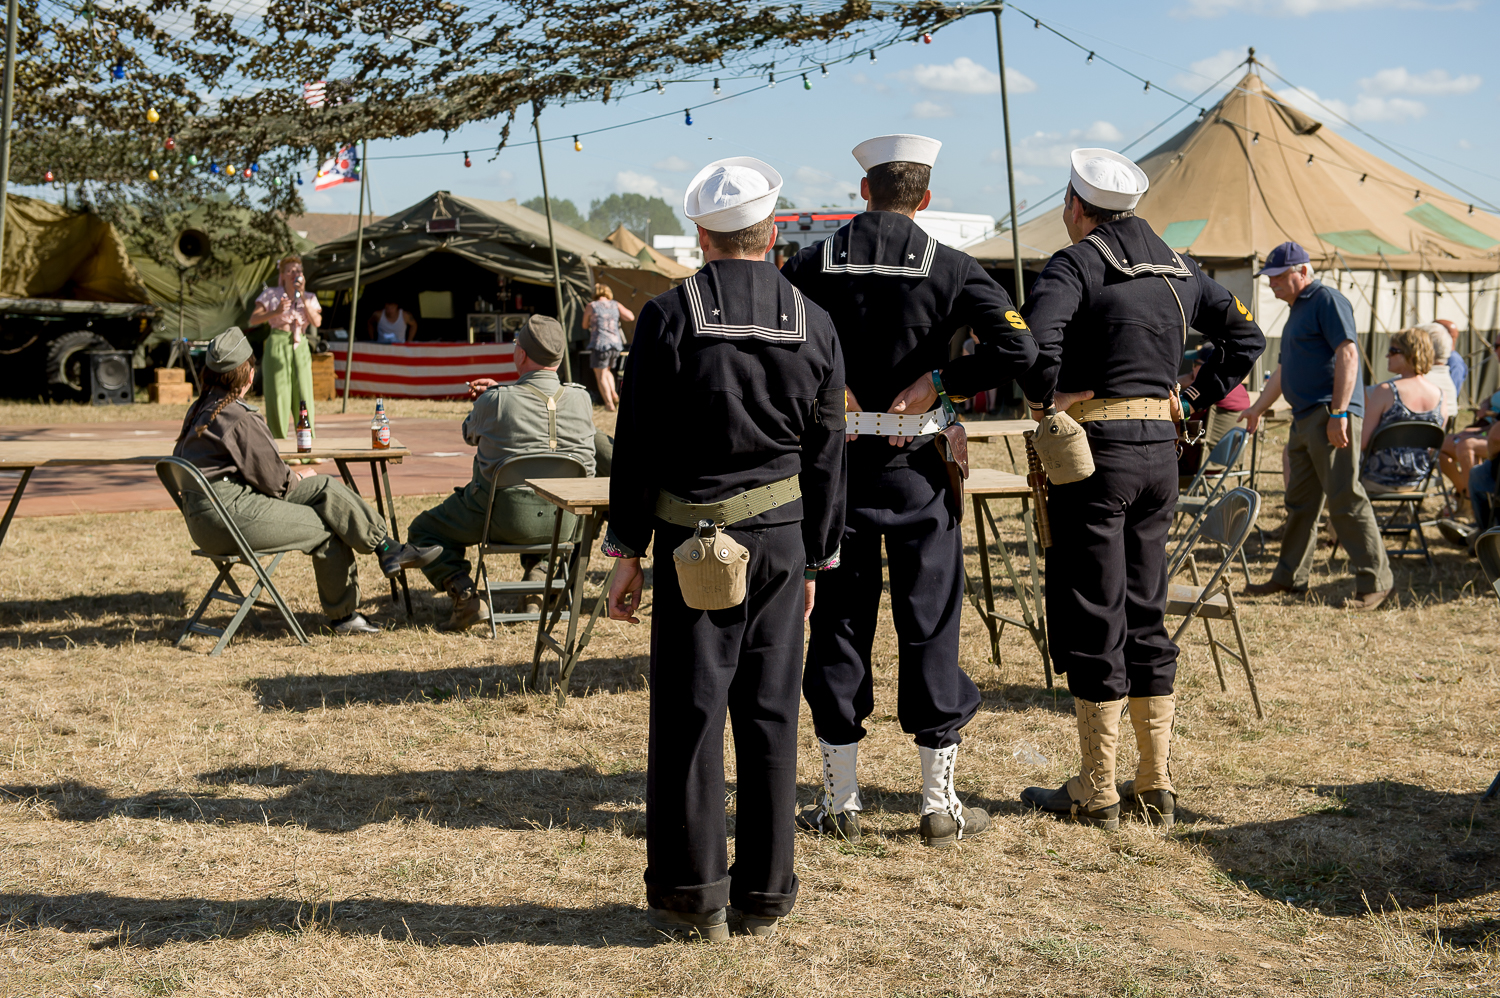  American navy re-enactors listening to singer at the War and peace show, kent 